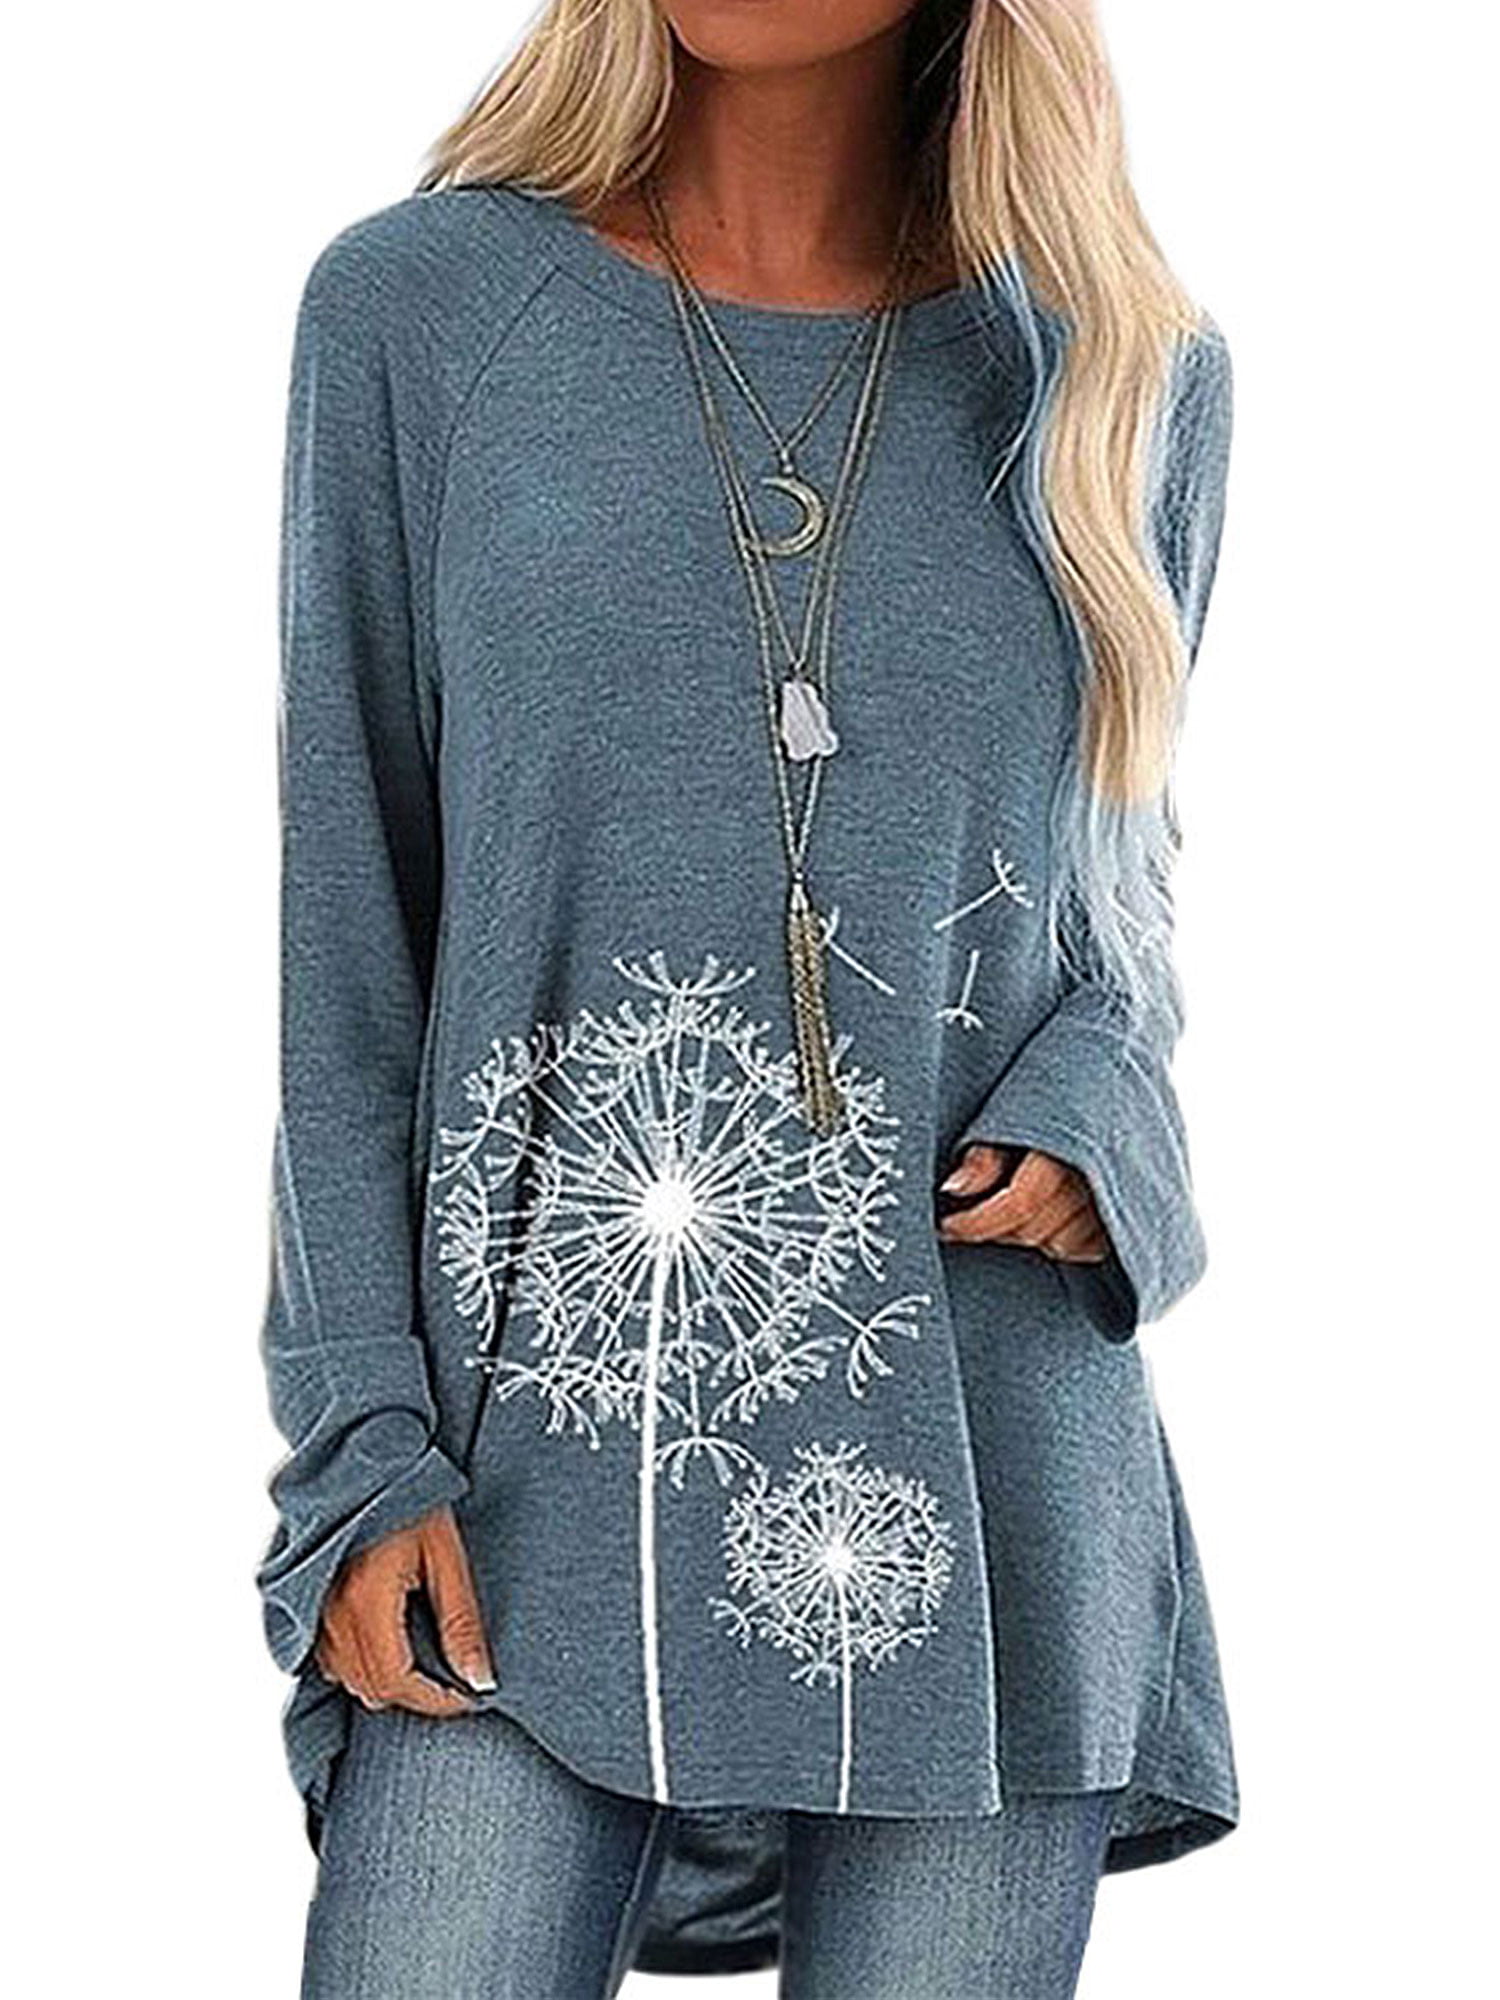 Plus Size Shirts for Women Long Sleeve Floral Printed Casual Loose Summer Fall Basic Tees T Shirts Blouses Tunic Tops 